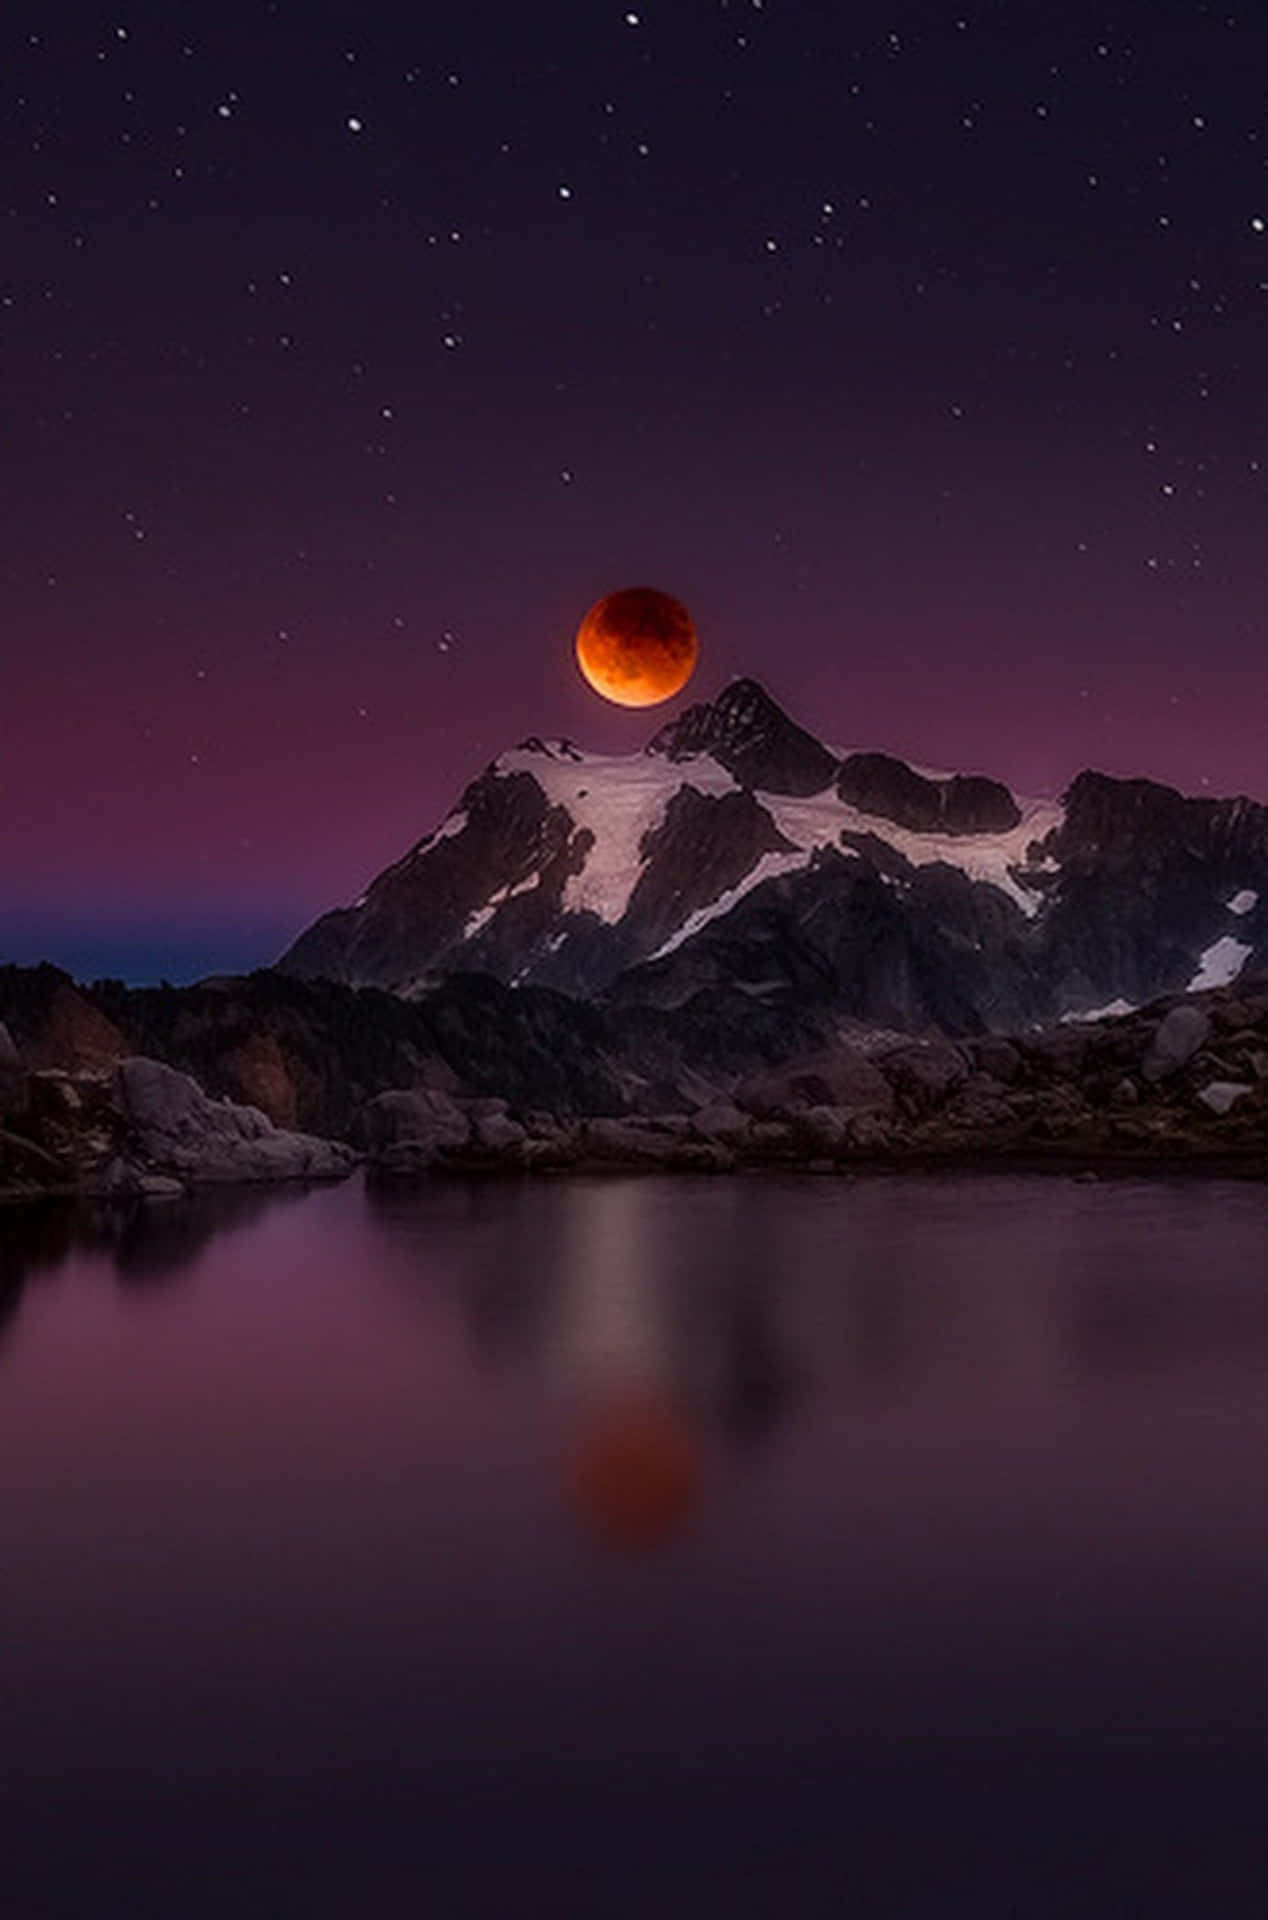 Magnificent Full Moon over the Mountains